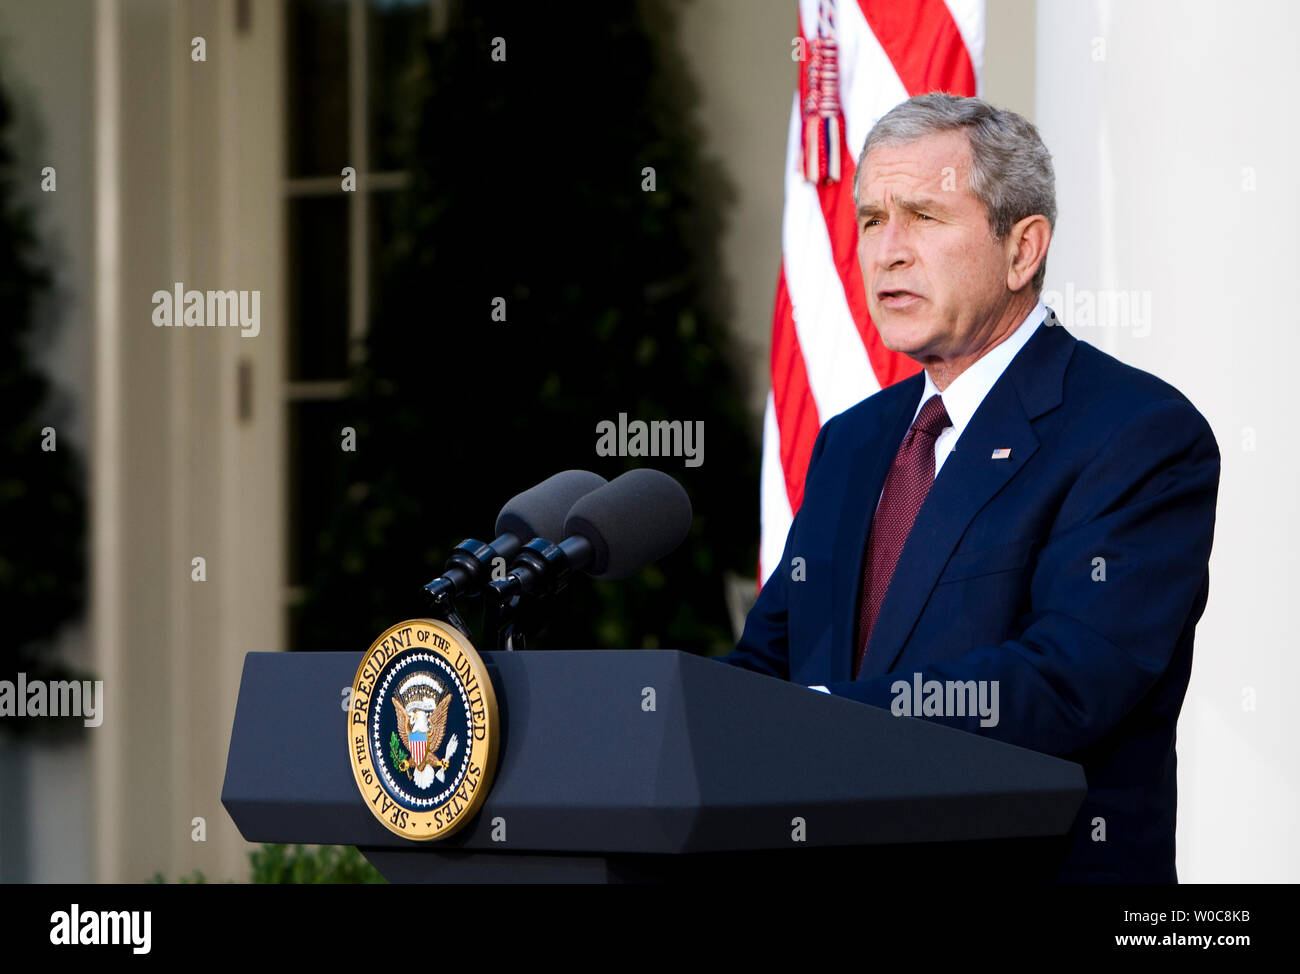 U.S. President George W. Bush delivers remarks on the conflict between Georgia and Russia from the Rose Garden at the White House in Washington on August 11, 2008. Bush condemned the bombings by Russia in an escalation of the conflict over the South Ossetian region of Georgia. (UPI Photo/Patrick D. McDermott) Stock Photo